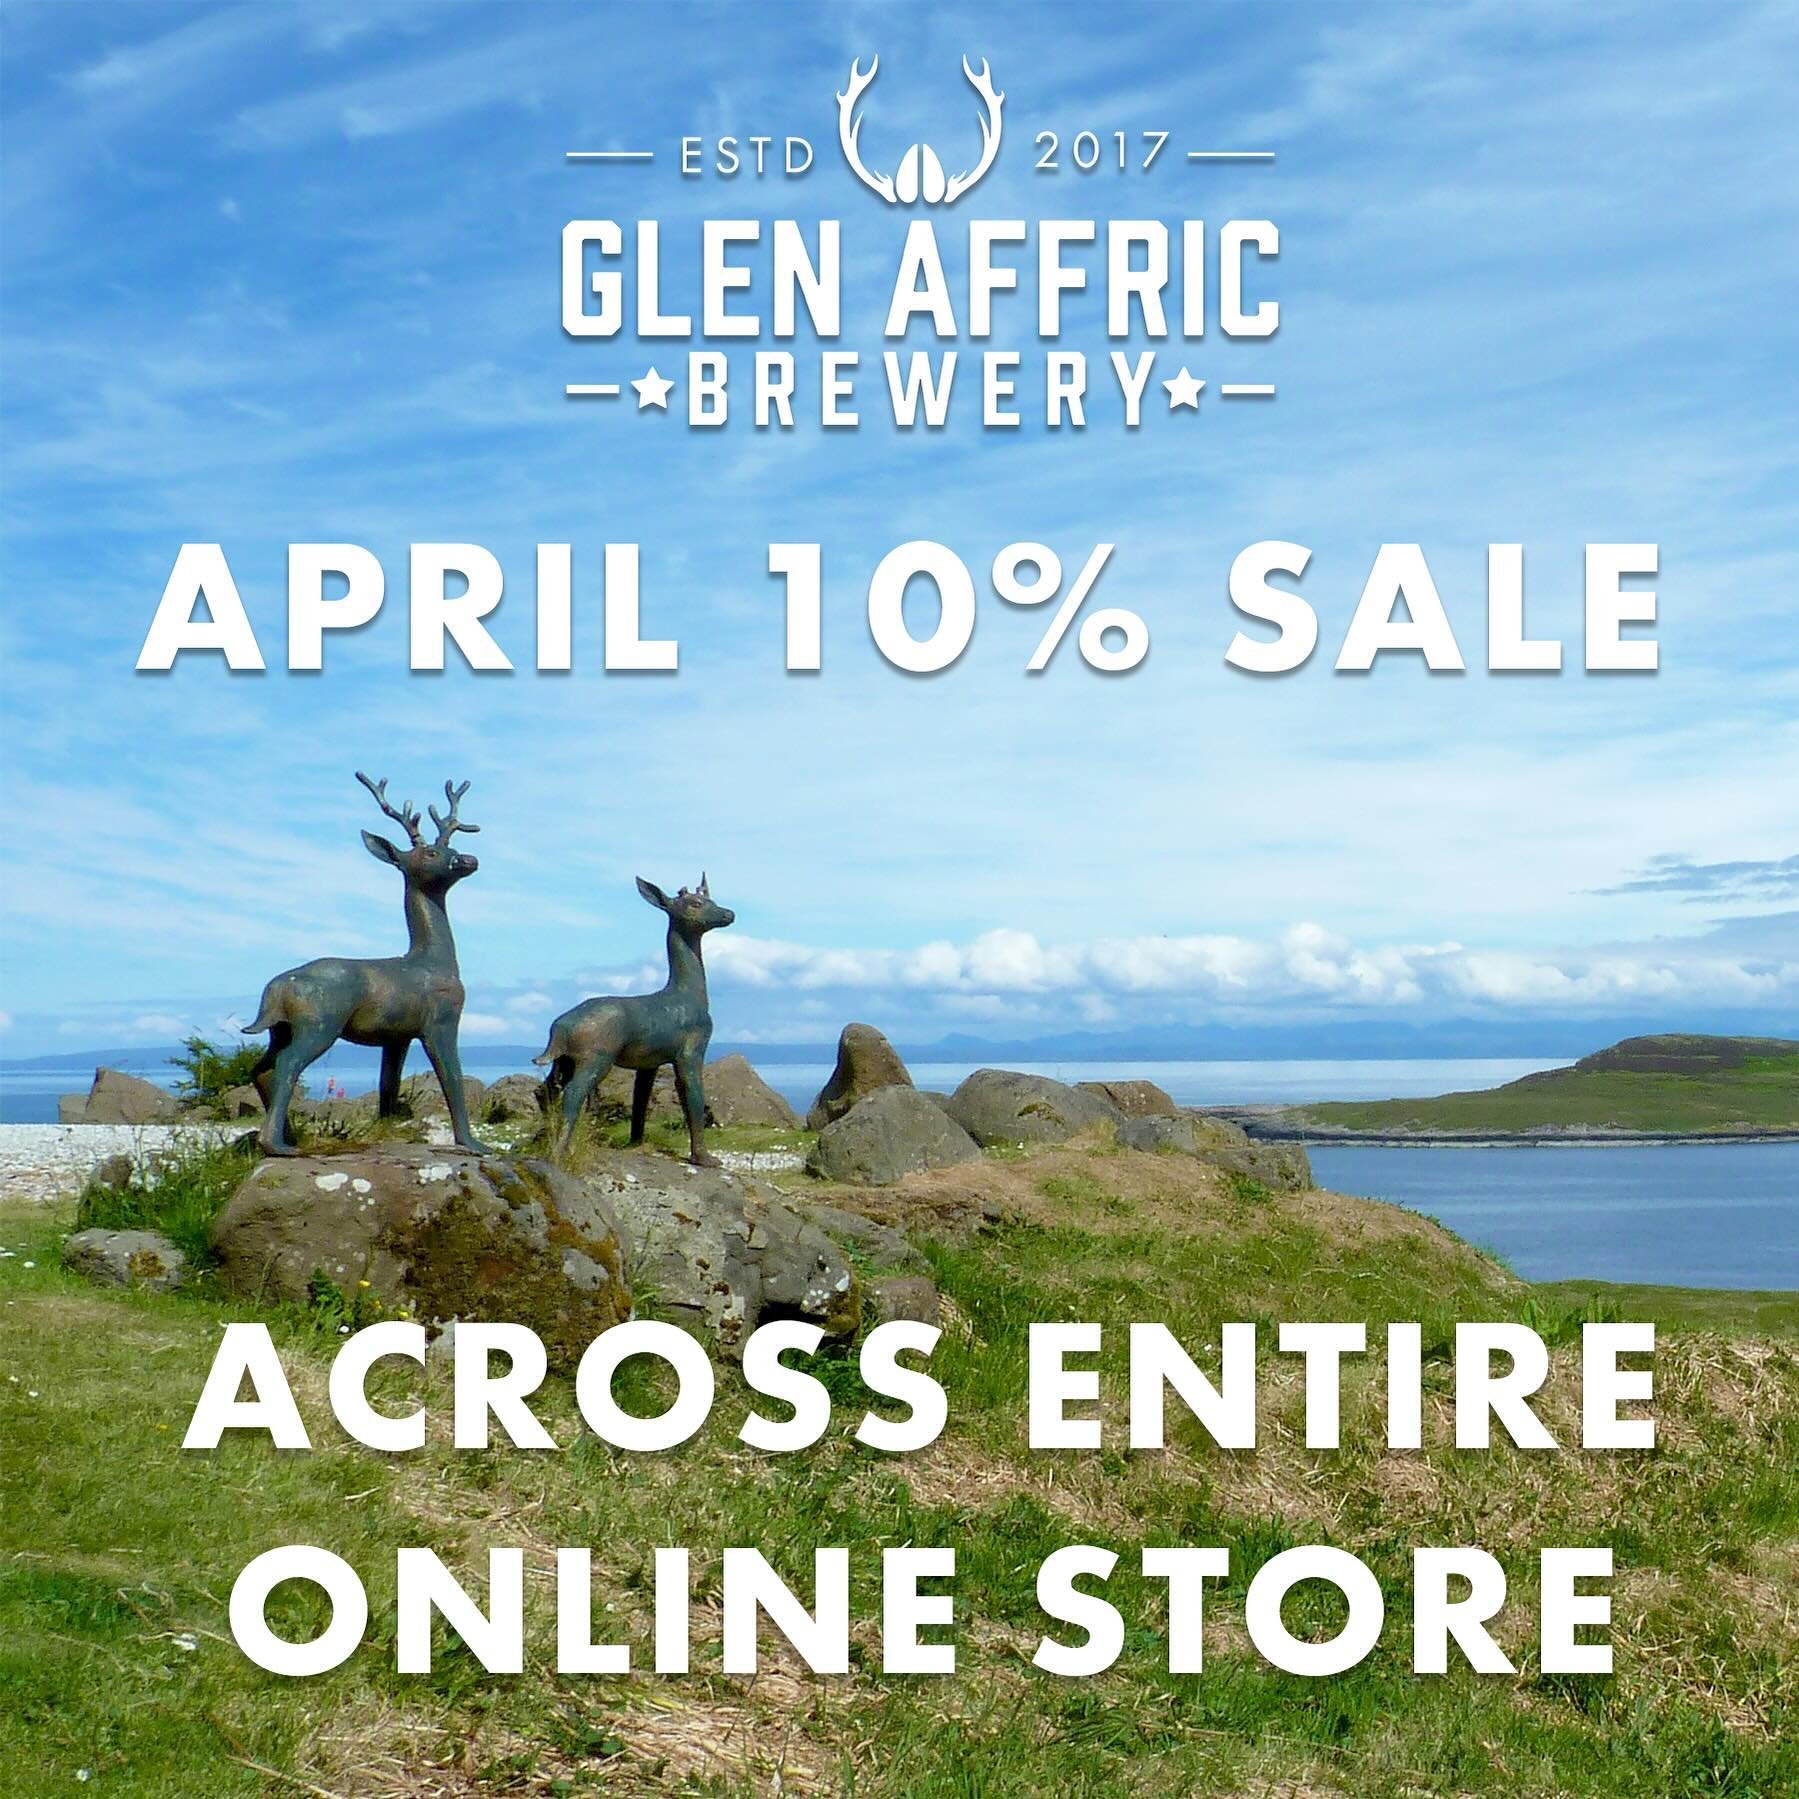 🌼As the flowers bloom and the sun shines brighter, we&rsquo;re offering you a great deal which applies to our entire online store  🏷️Use Discount Code APRIL10 at checkout to get 10% off your whole order

☀️Don&rsquo;t miss out on this limited-time 